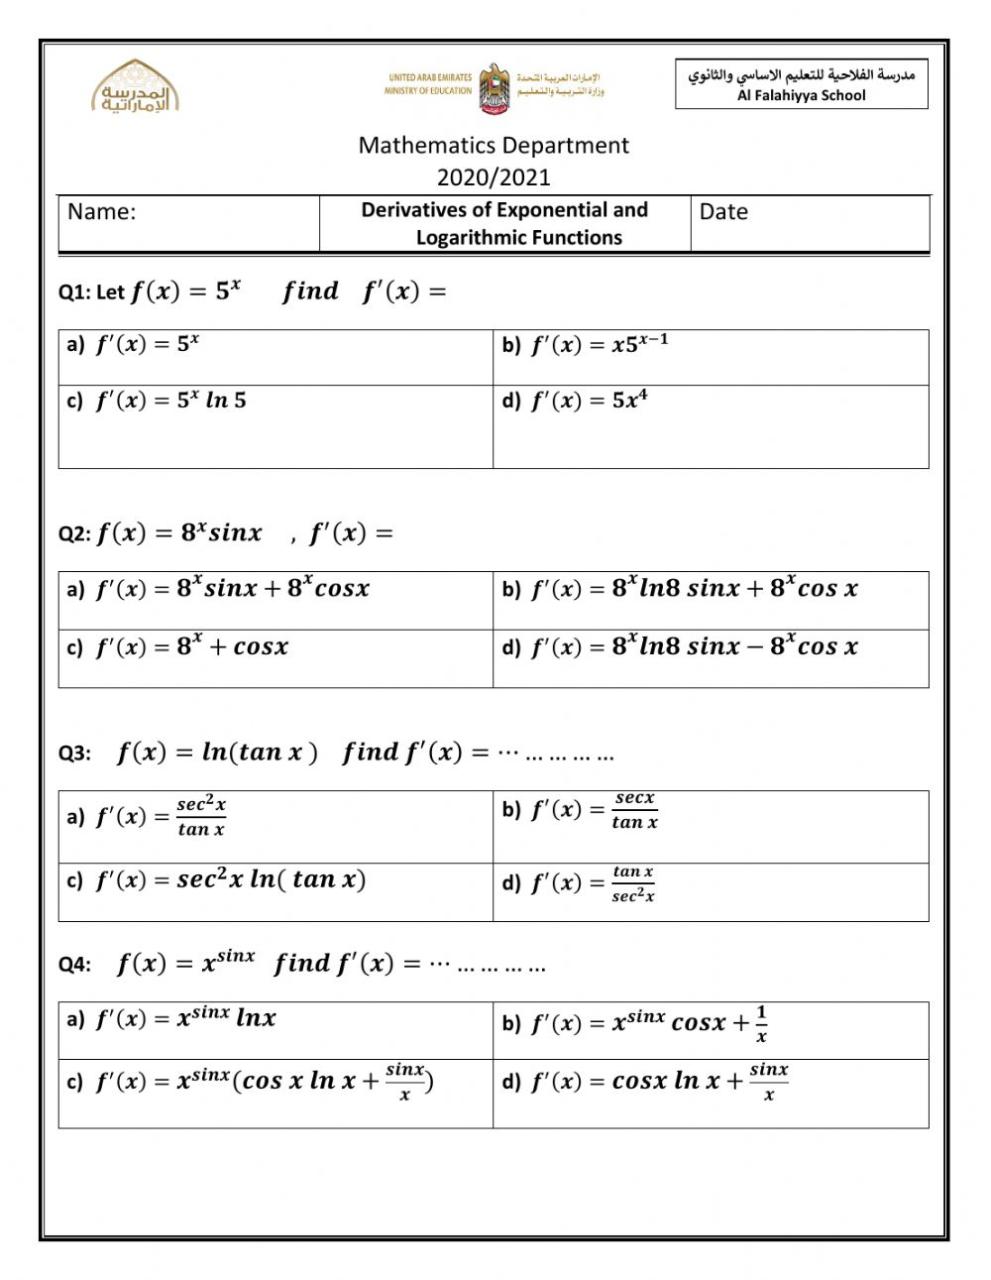 Derivative of exponential and logarithmic functions worksheet